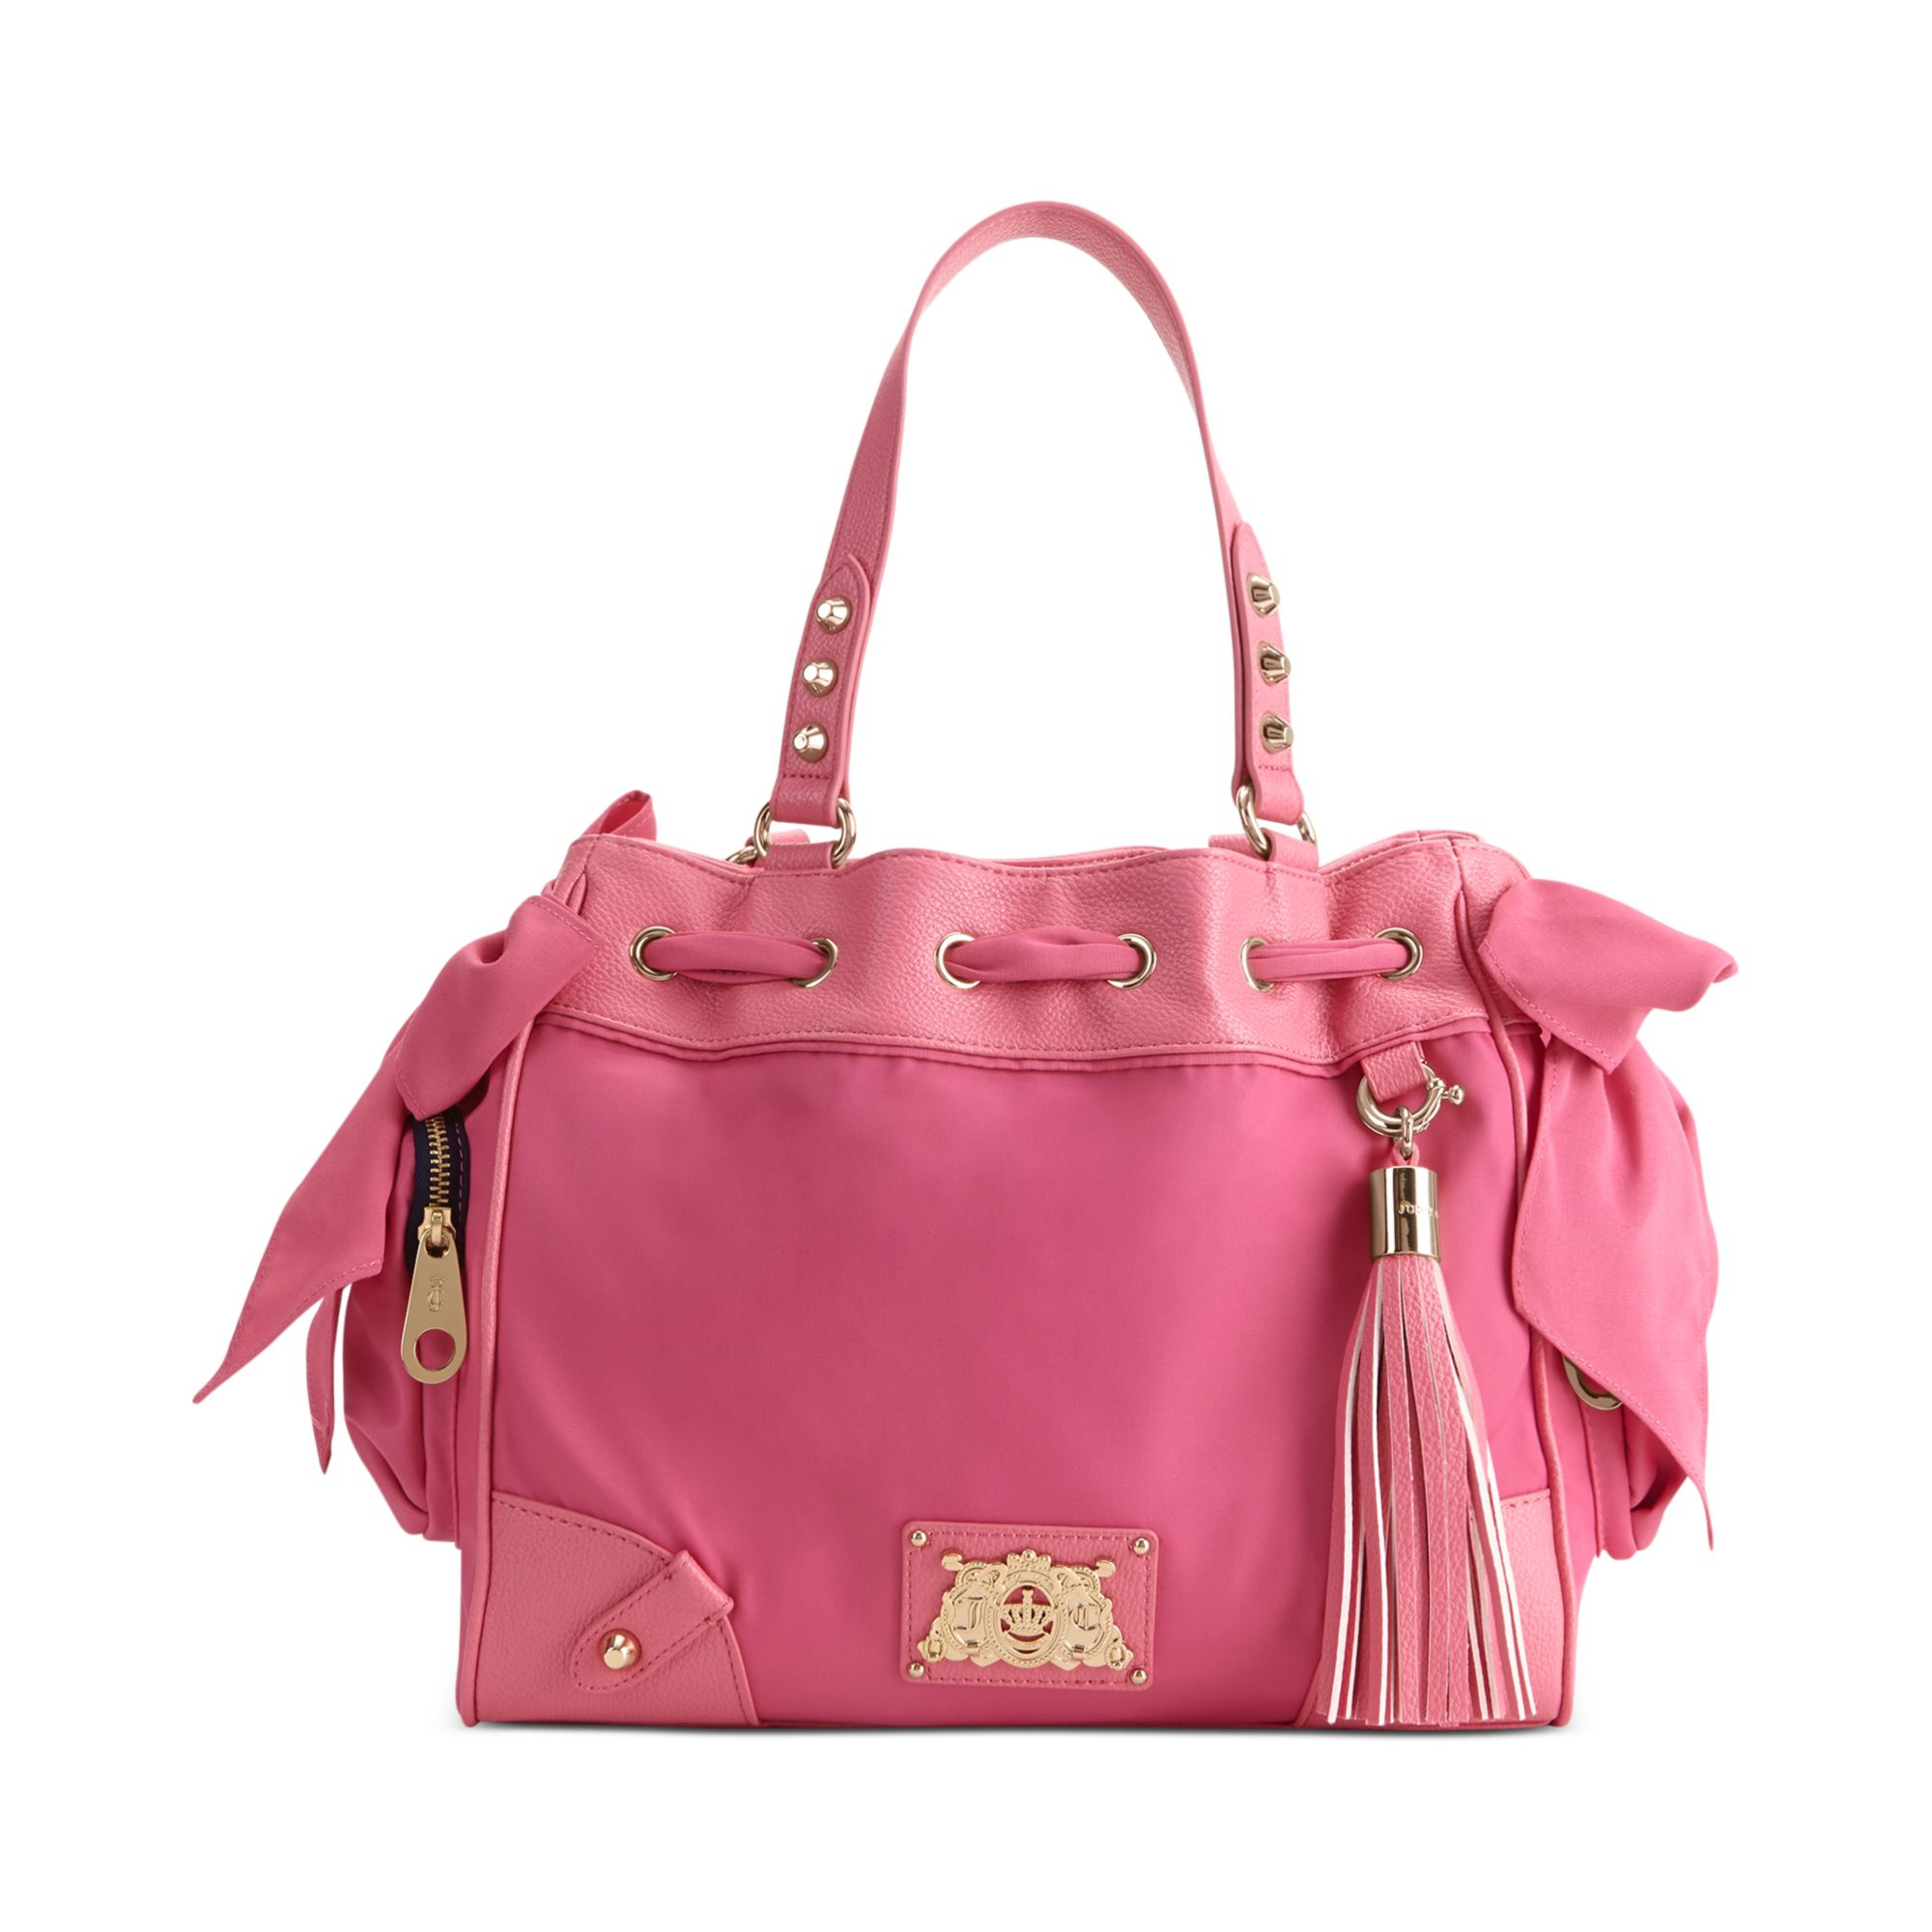 Juicy Couture Purses And Bags | IQS Executive